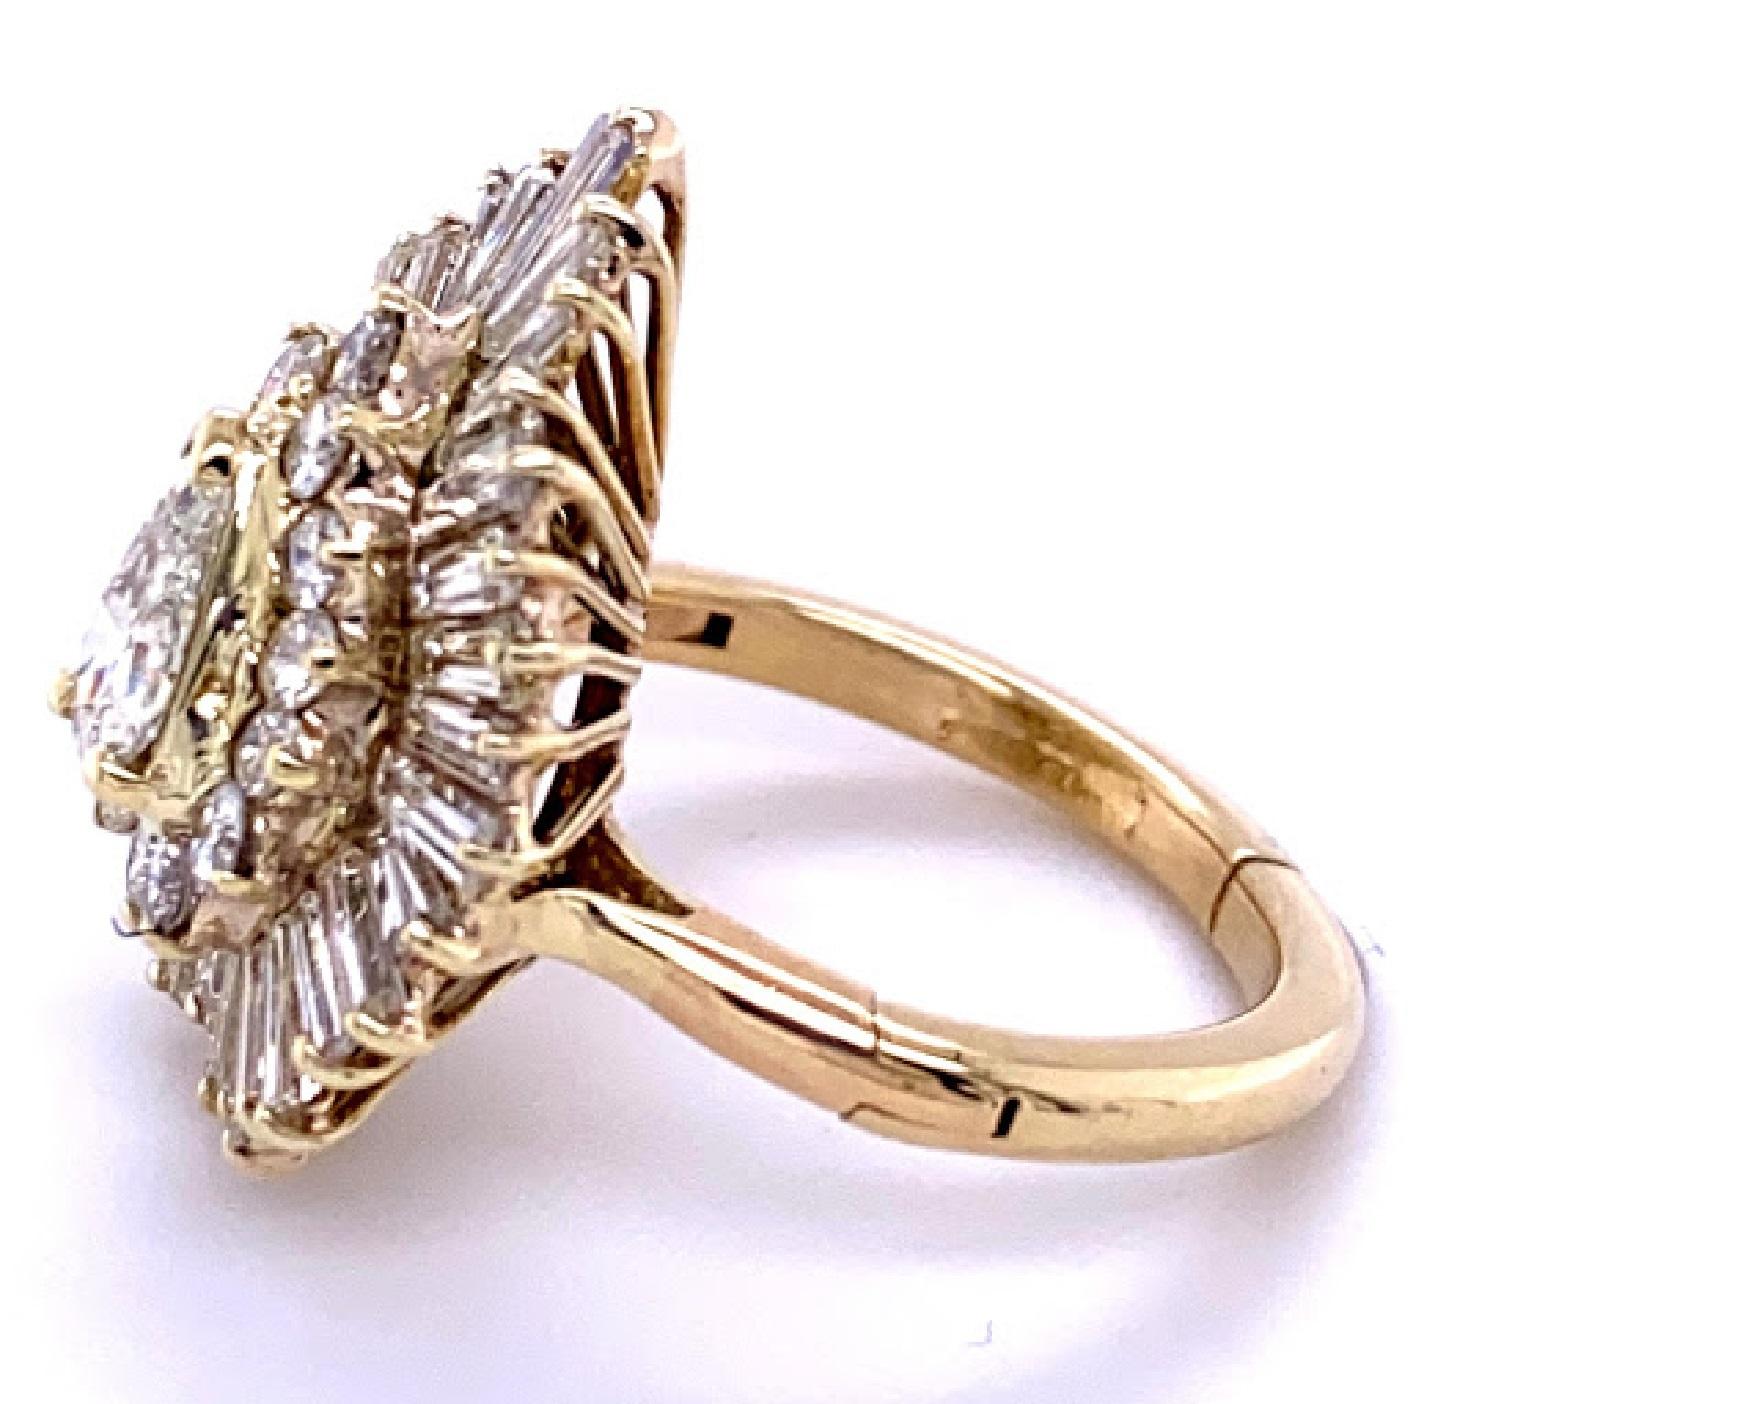 14 karat yellow gold cluster ring with a pear shaped center stone measuring 7 mm by 5 mm weighing 0.70 carat. Surrounding the pear shaped center stone are 14 round brilliant diamonds weighing approximately 0.42 carat total weight, as well as 32